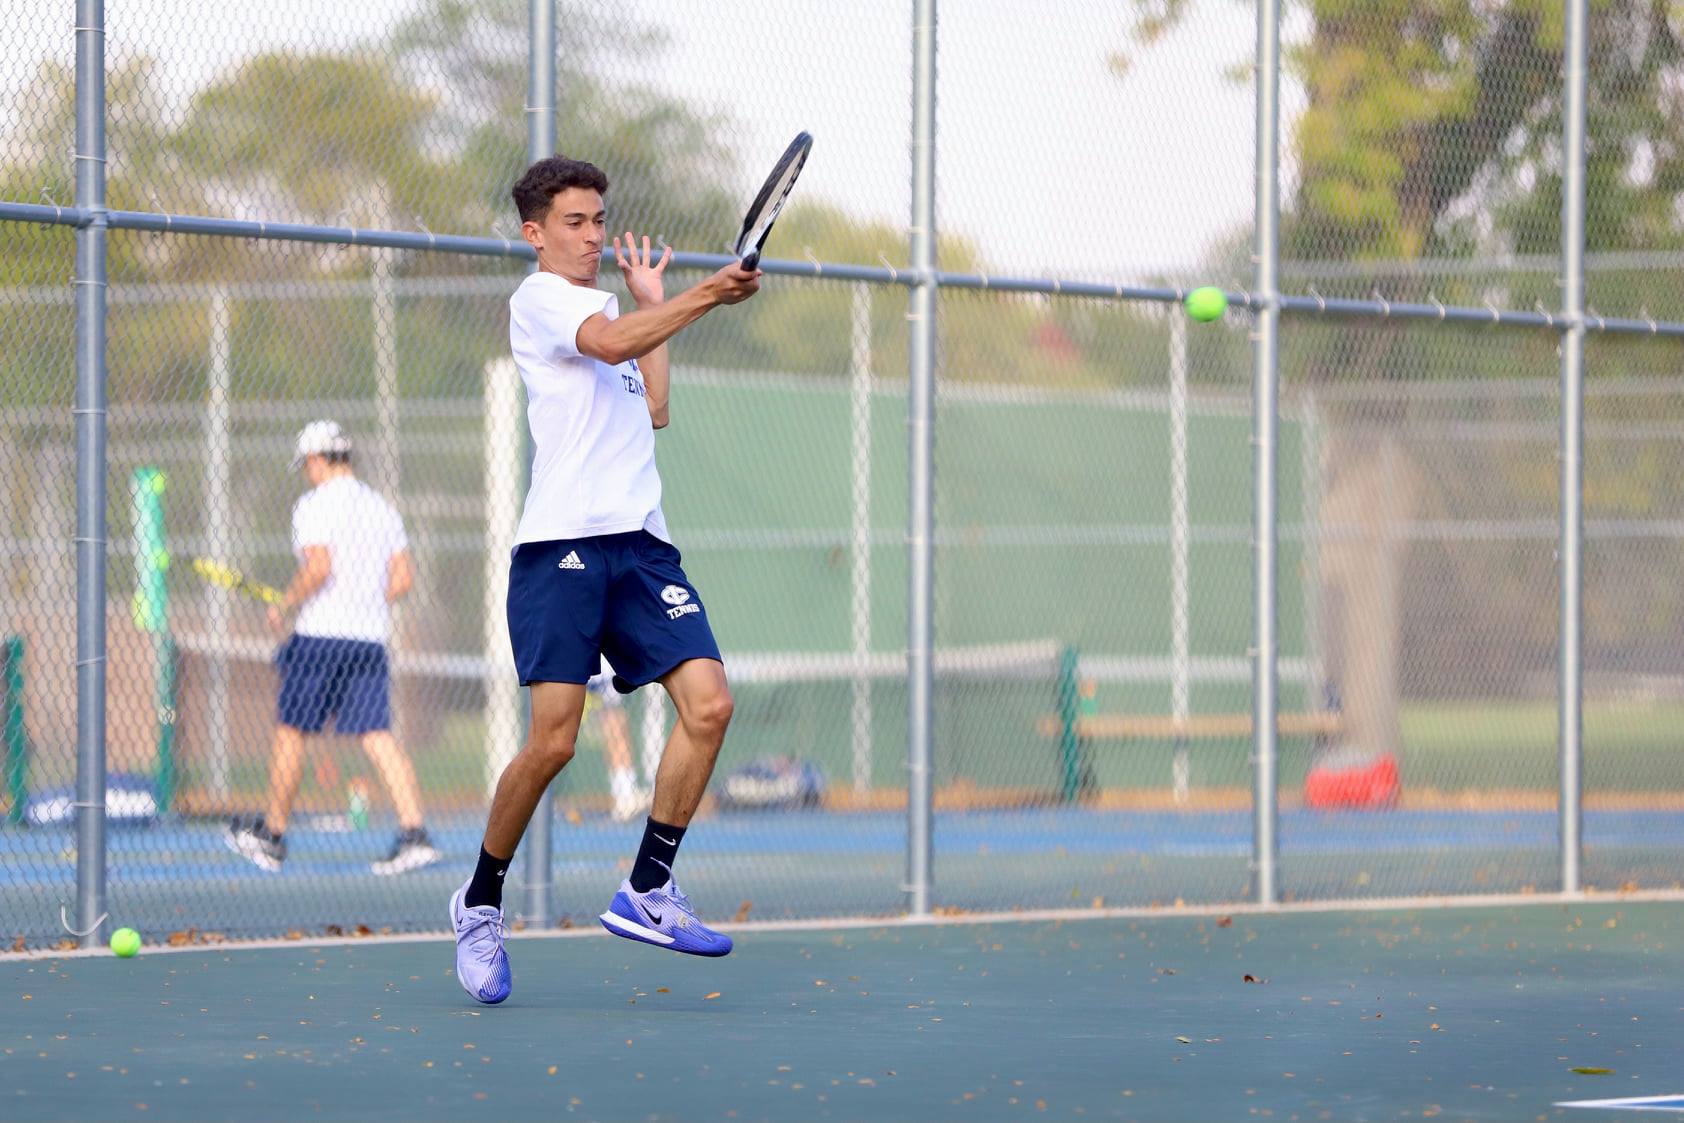 Tritons end fall ranked eighth